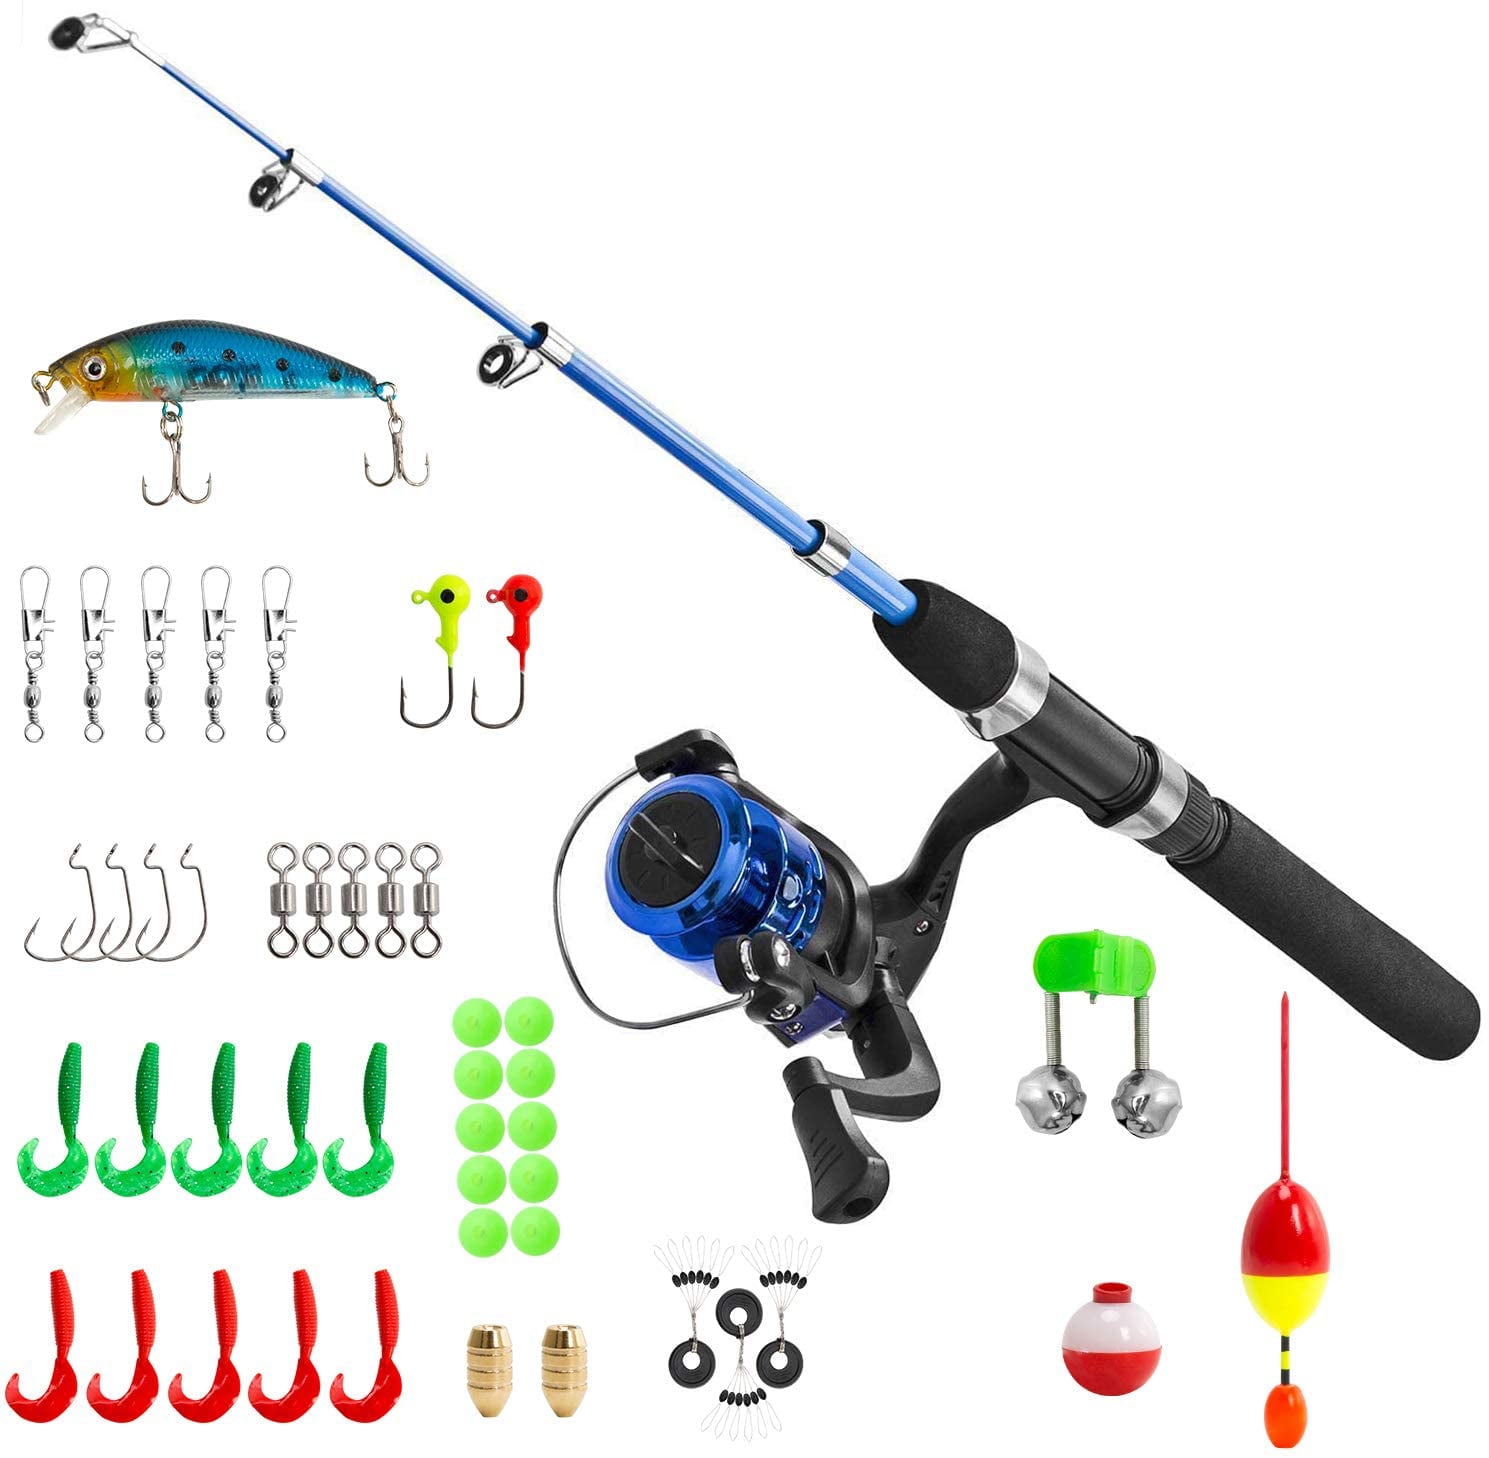 Kids Fishing Pole,Light and Portable Telescopic Fishing Rod and Reel Combos for Youth Fishing